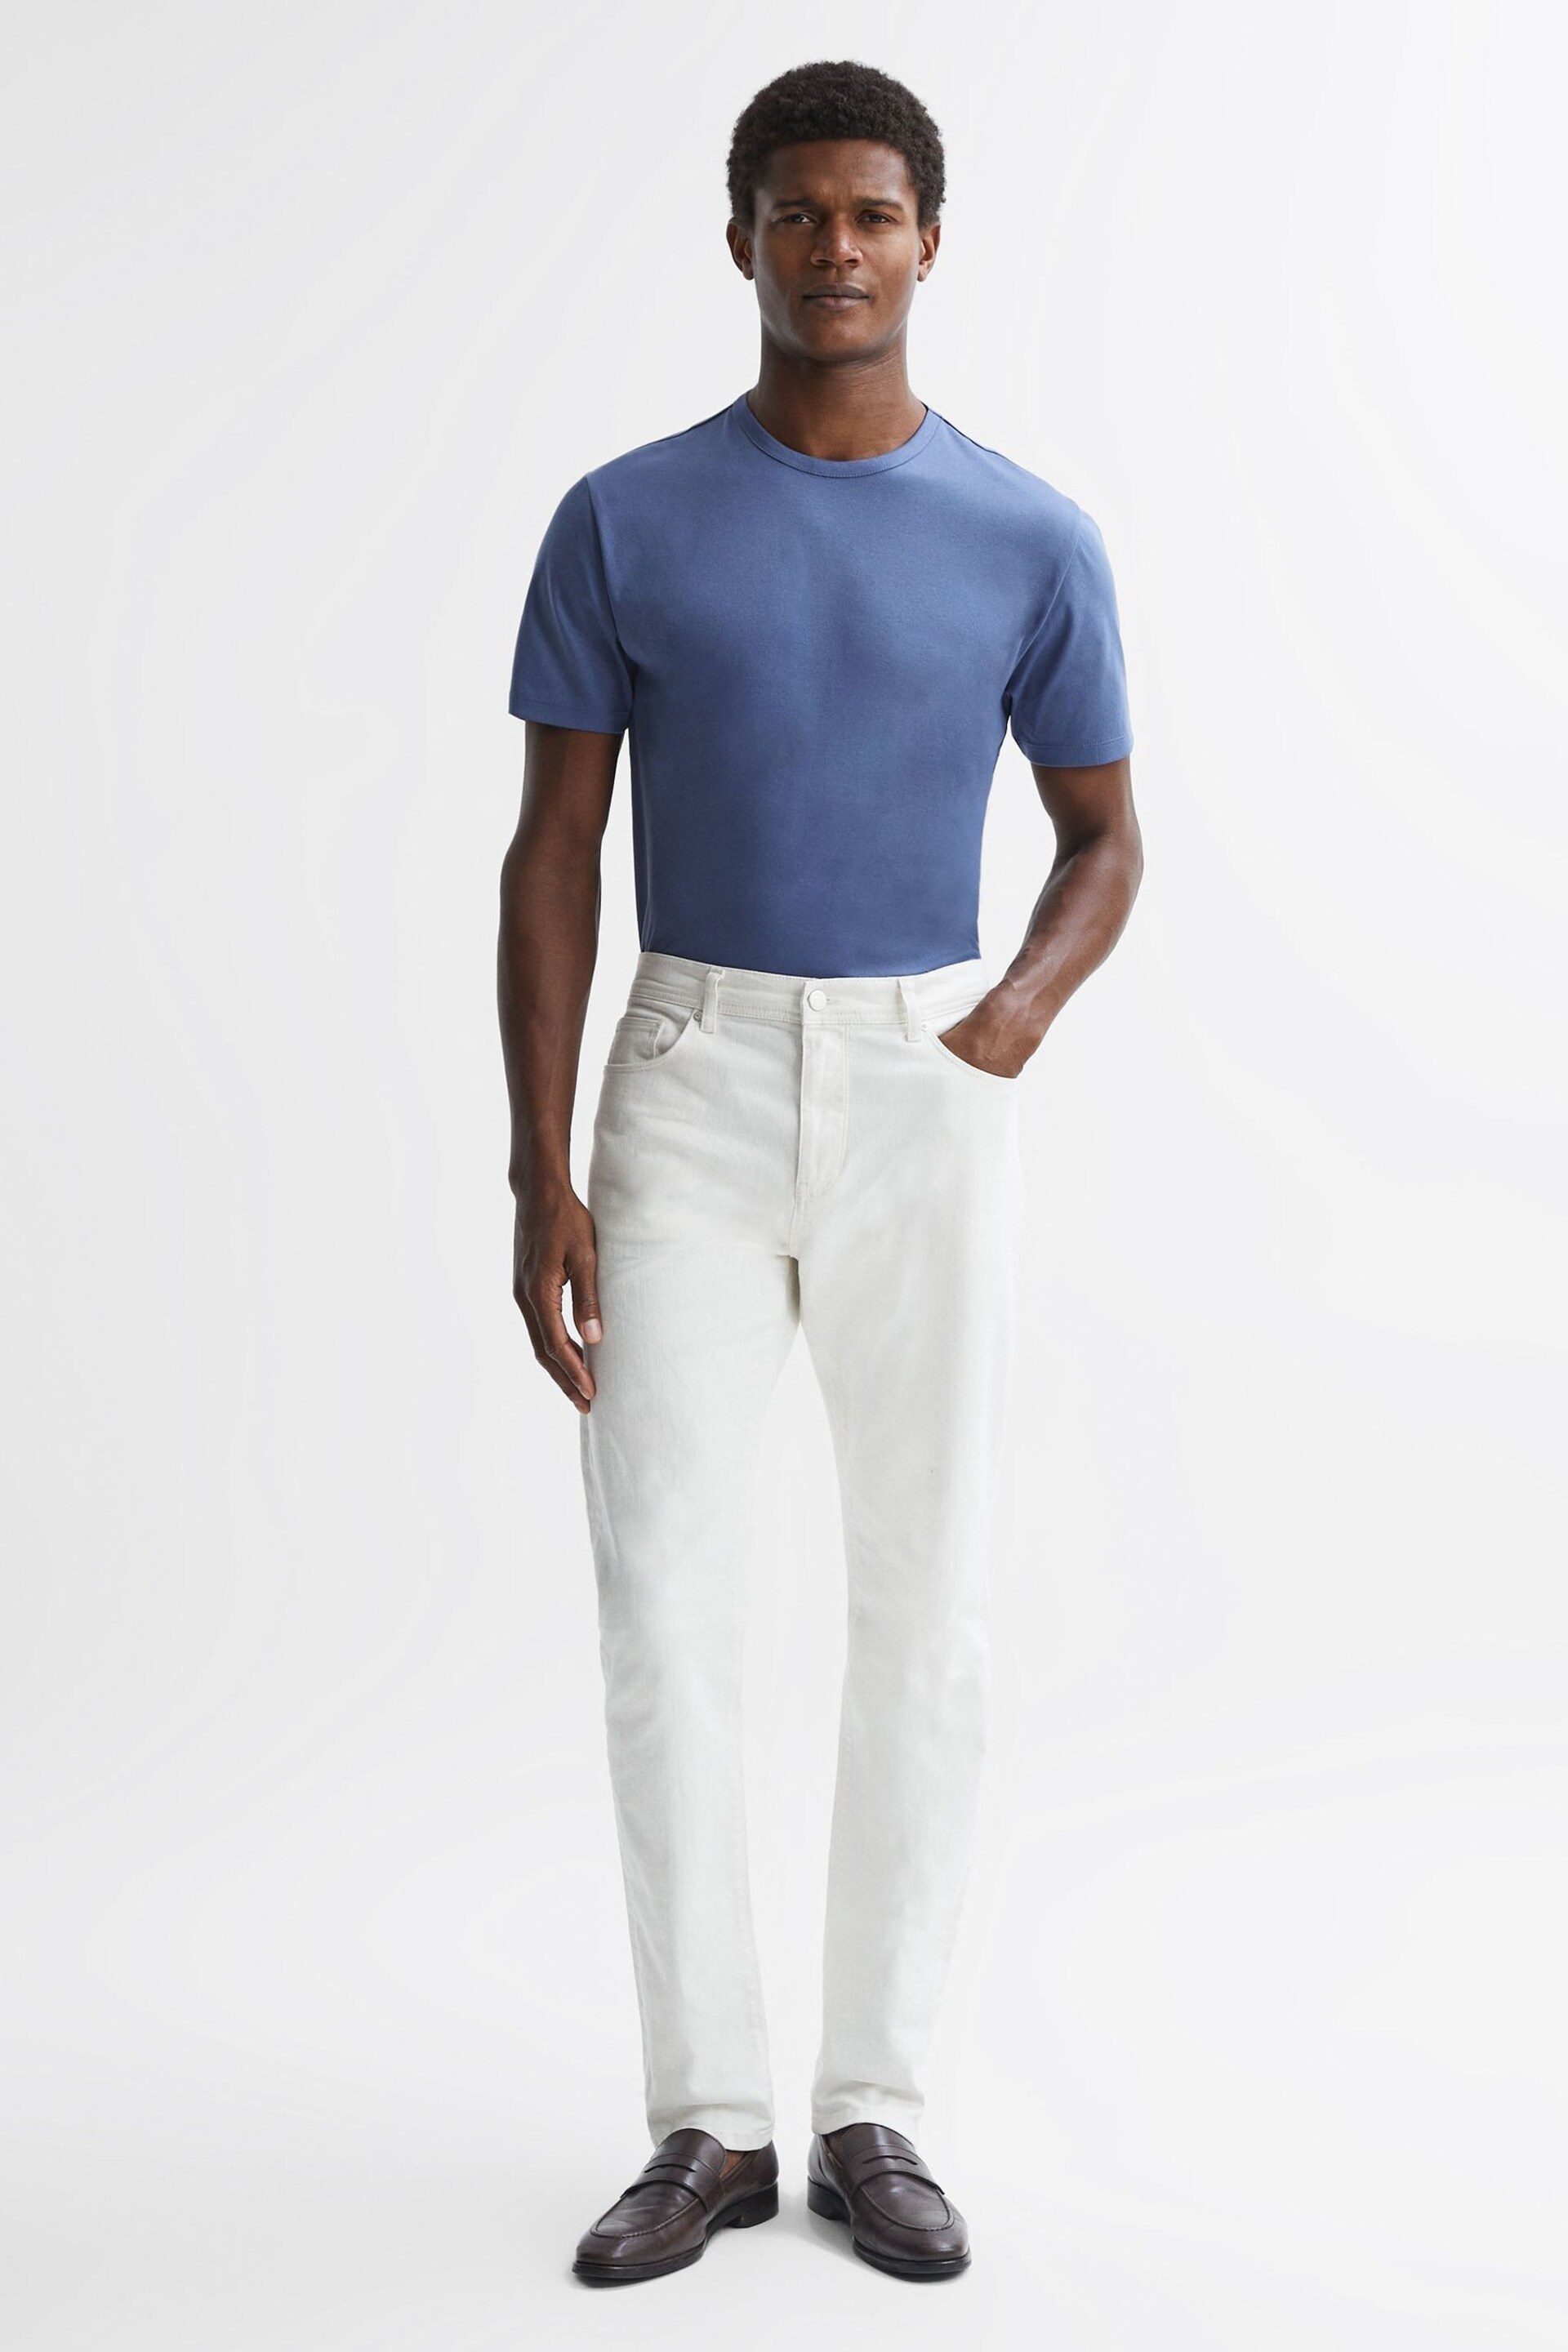 Reiss Airforce Blue Day Mercerised Cotton Crew Neck T-Shirt - Image 3 of 5